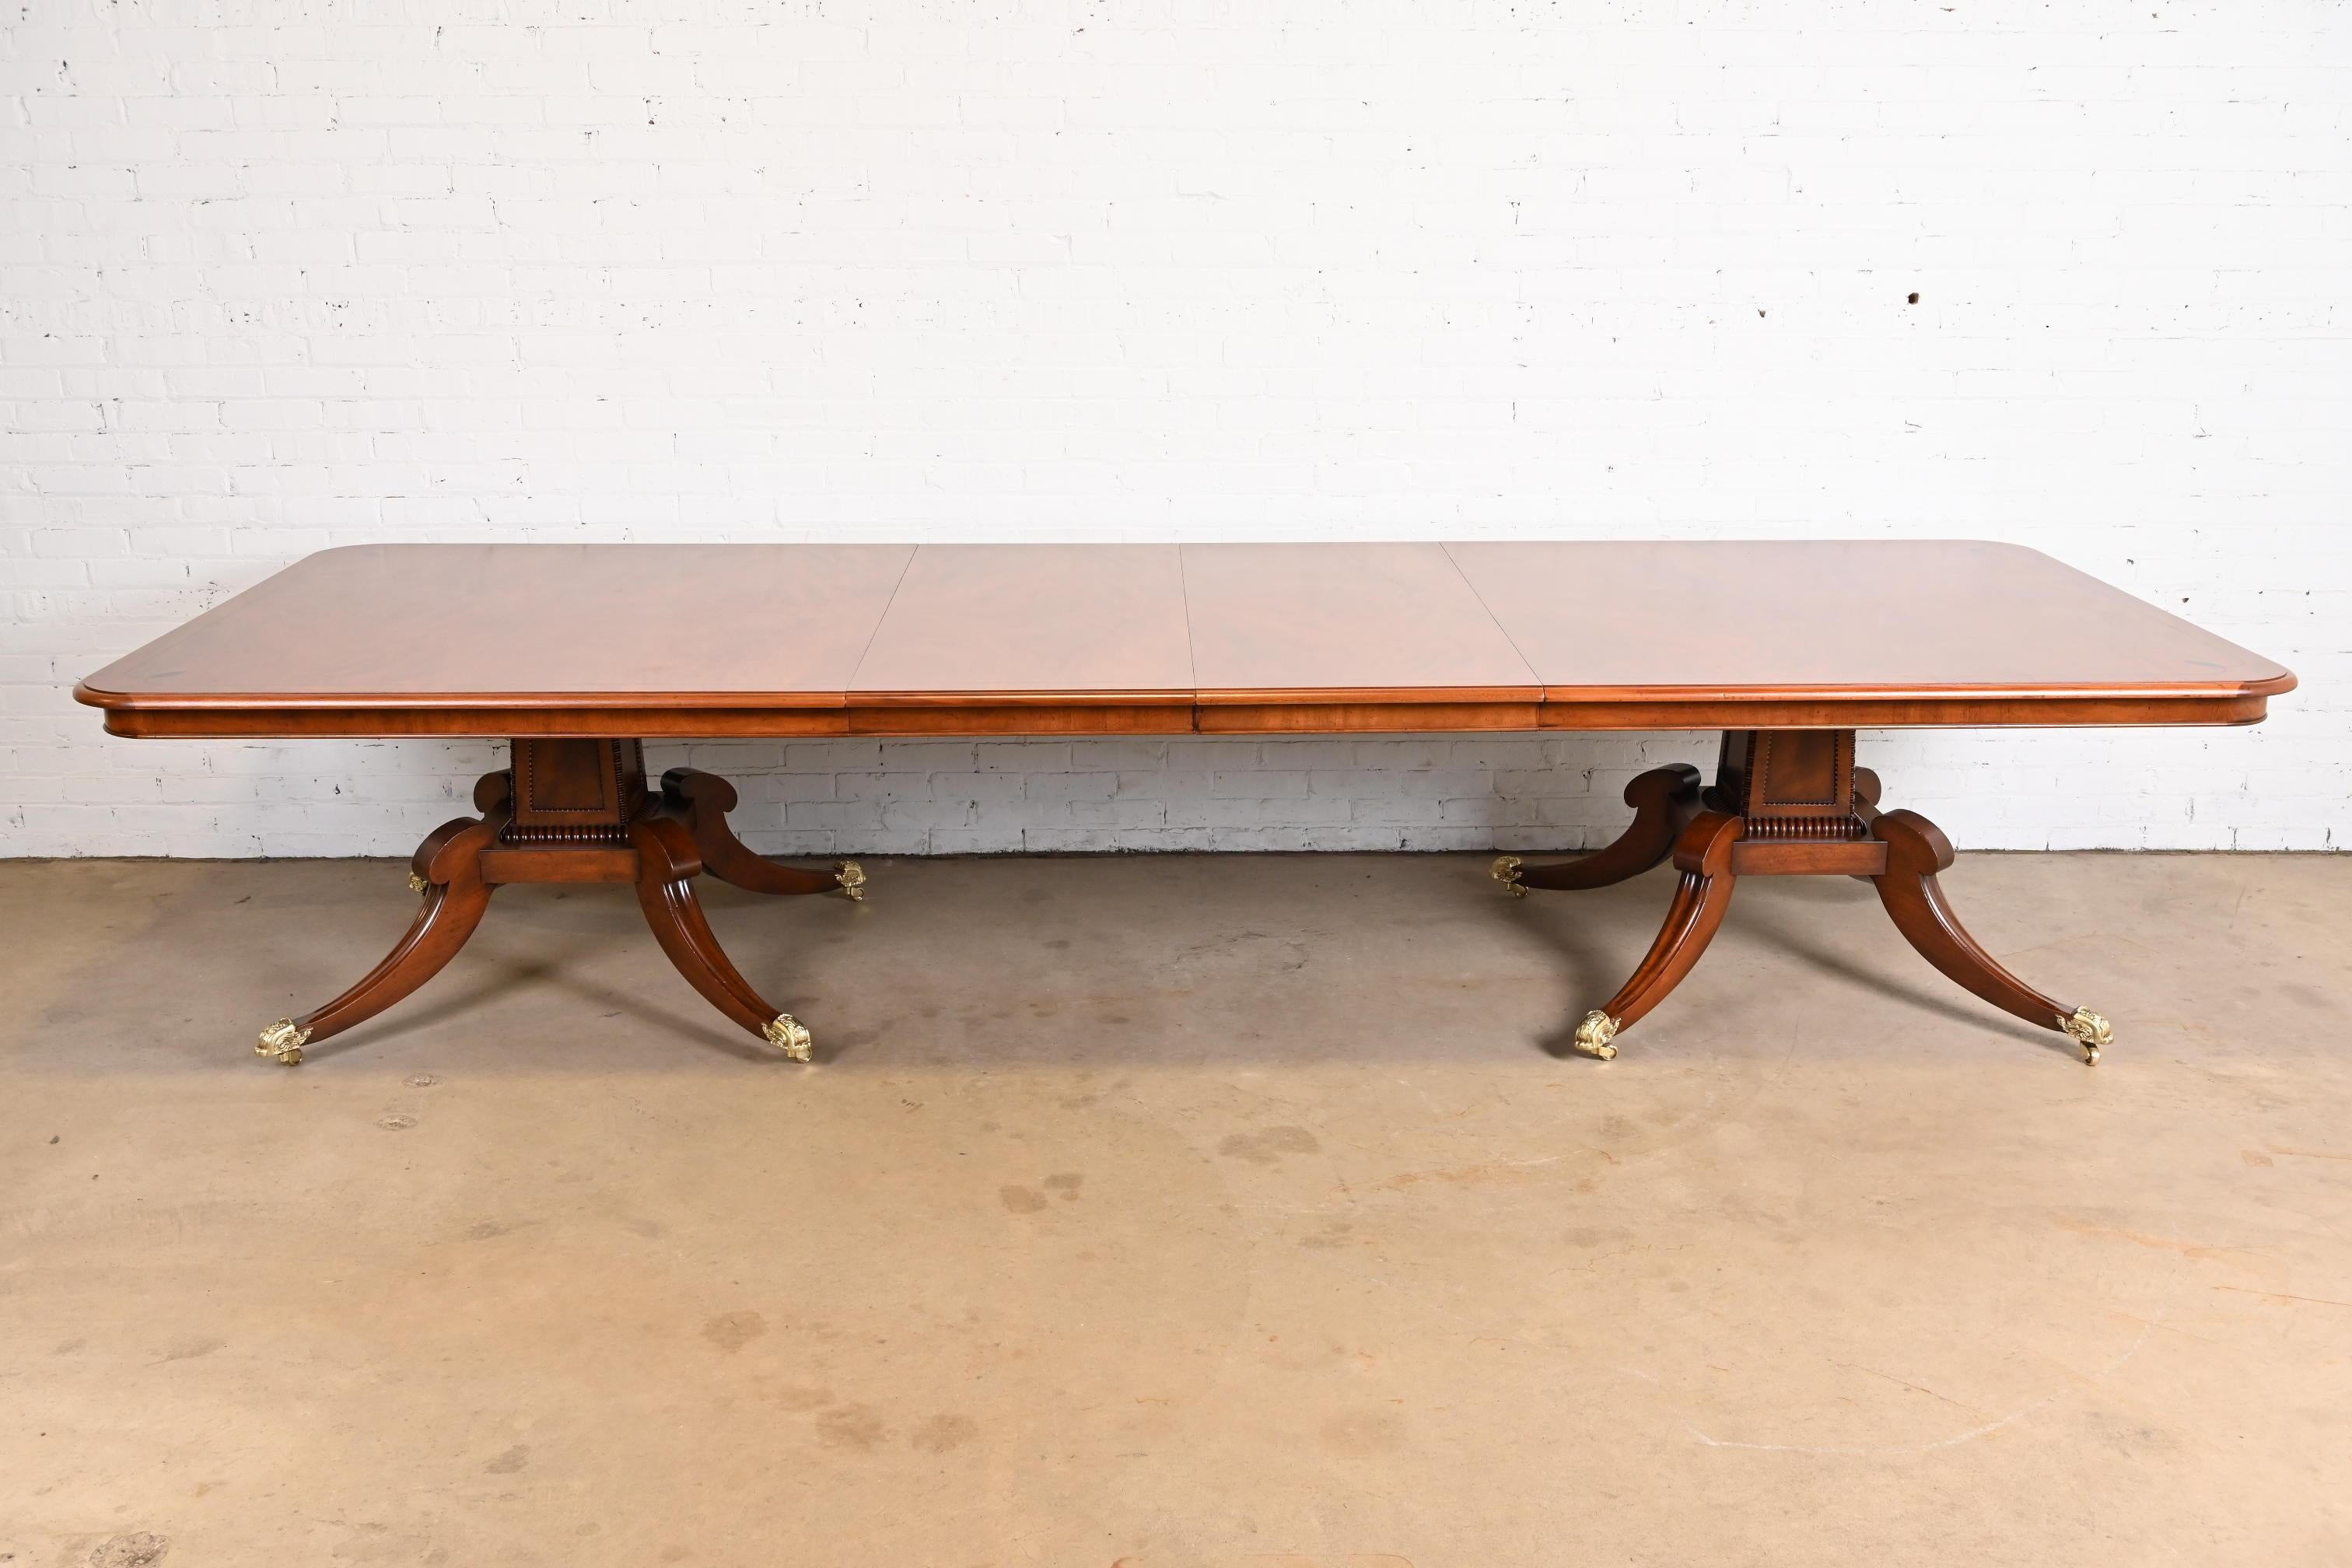 An exceptional English Georgian or Regency style double pedestal extension dining table

By Restall Brown & Clennell

England, Circa 1980s

Gorgeous figured mahogany, with ebony inlay, carved solid mahogany pedestals, and brass paw feet and